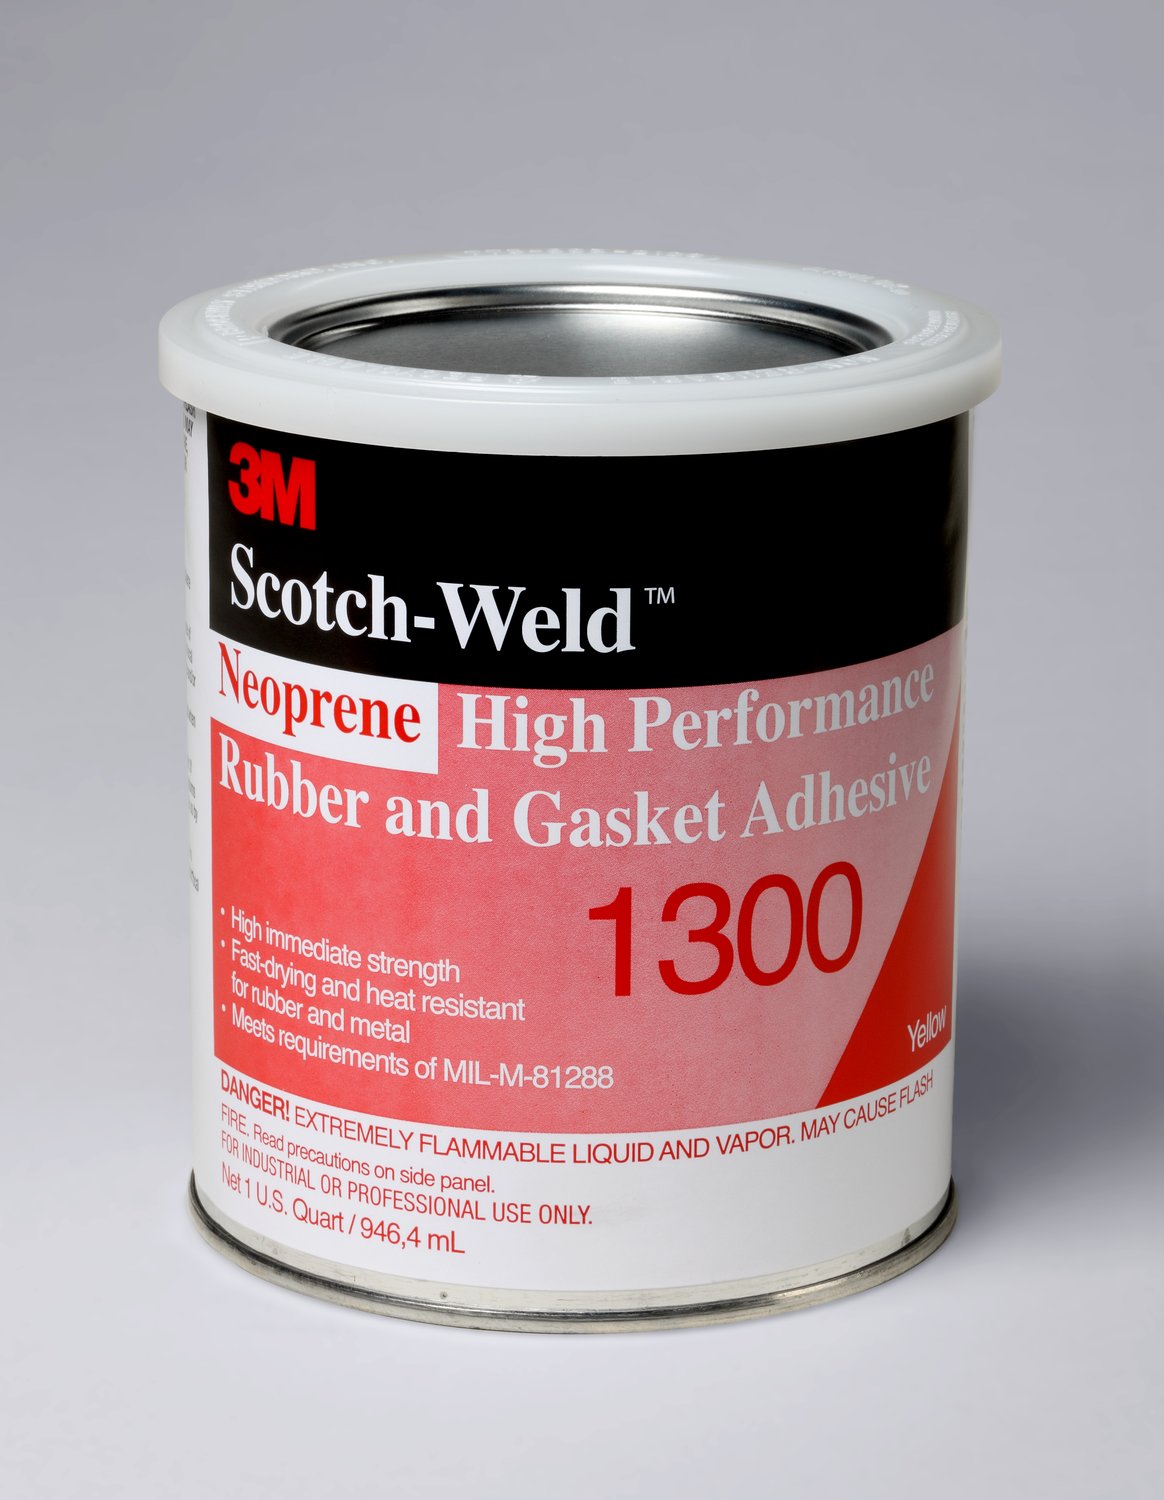 7100025171 - 3M Neoprene High Performance Rubber and Gasket Adhesive 1300, Yellow, 1
Quart, 12 Can/Case